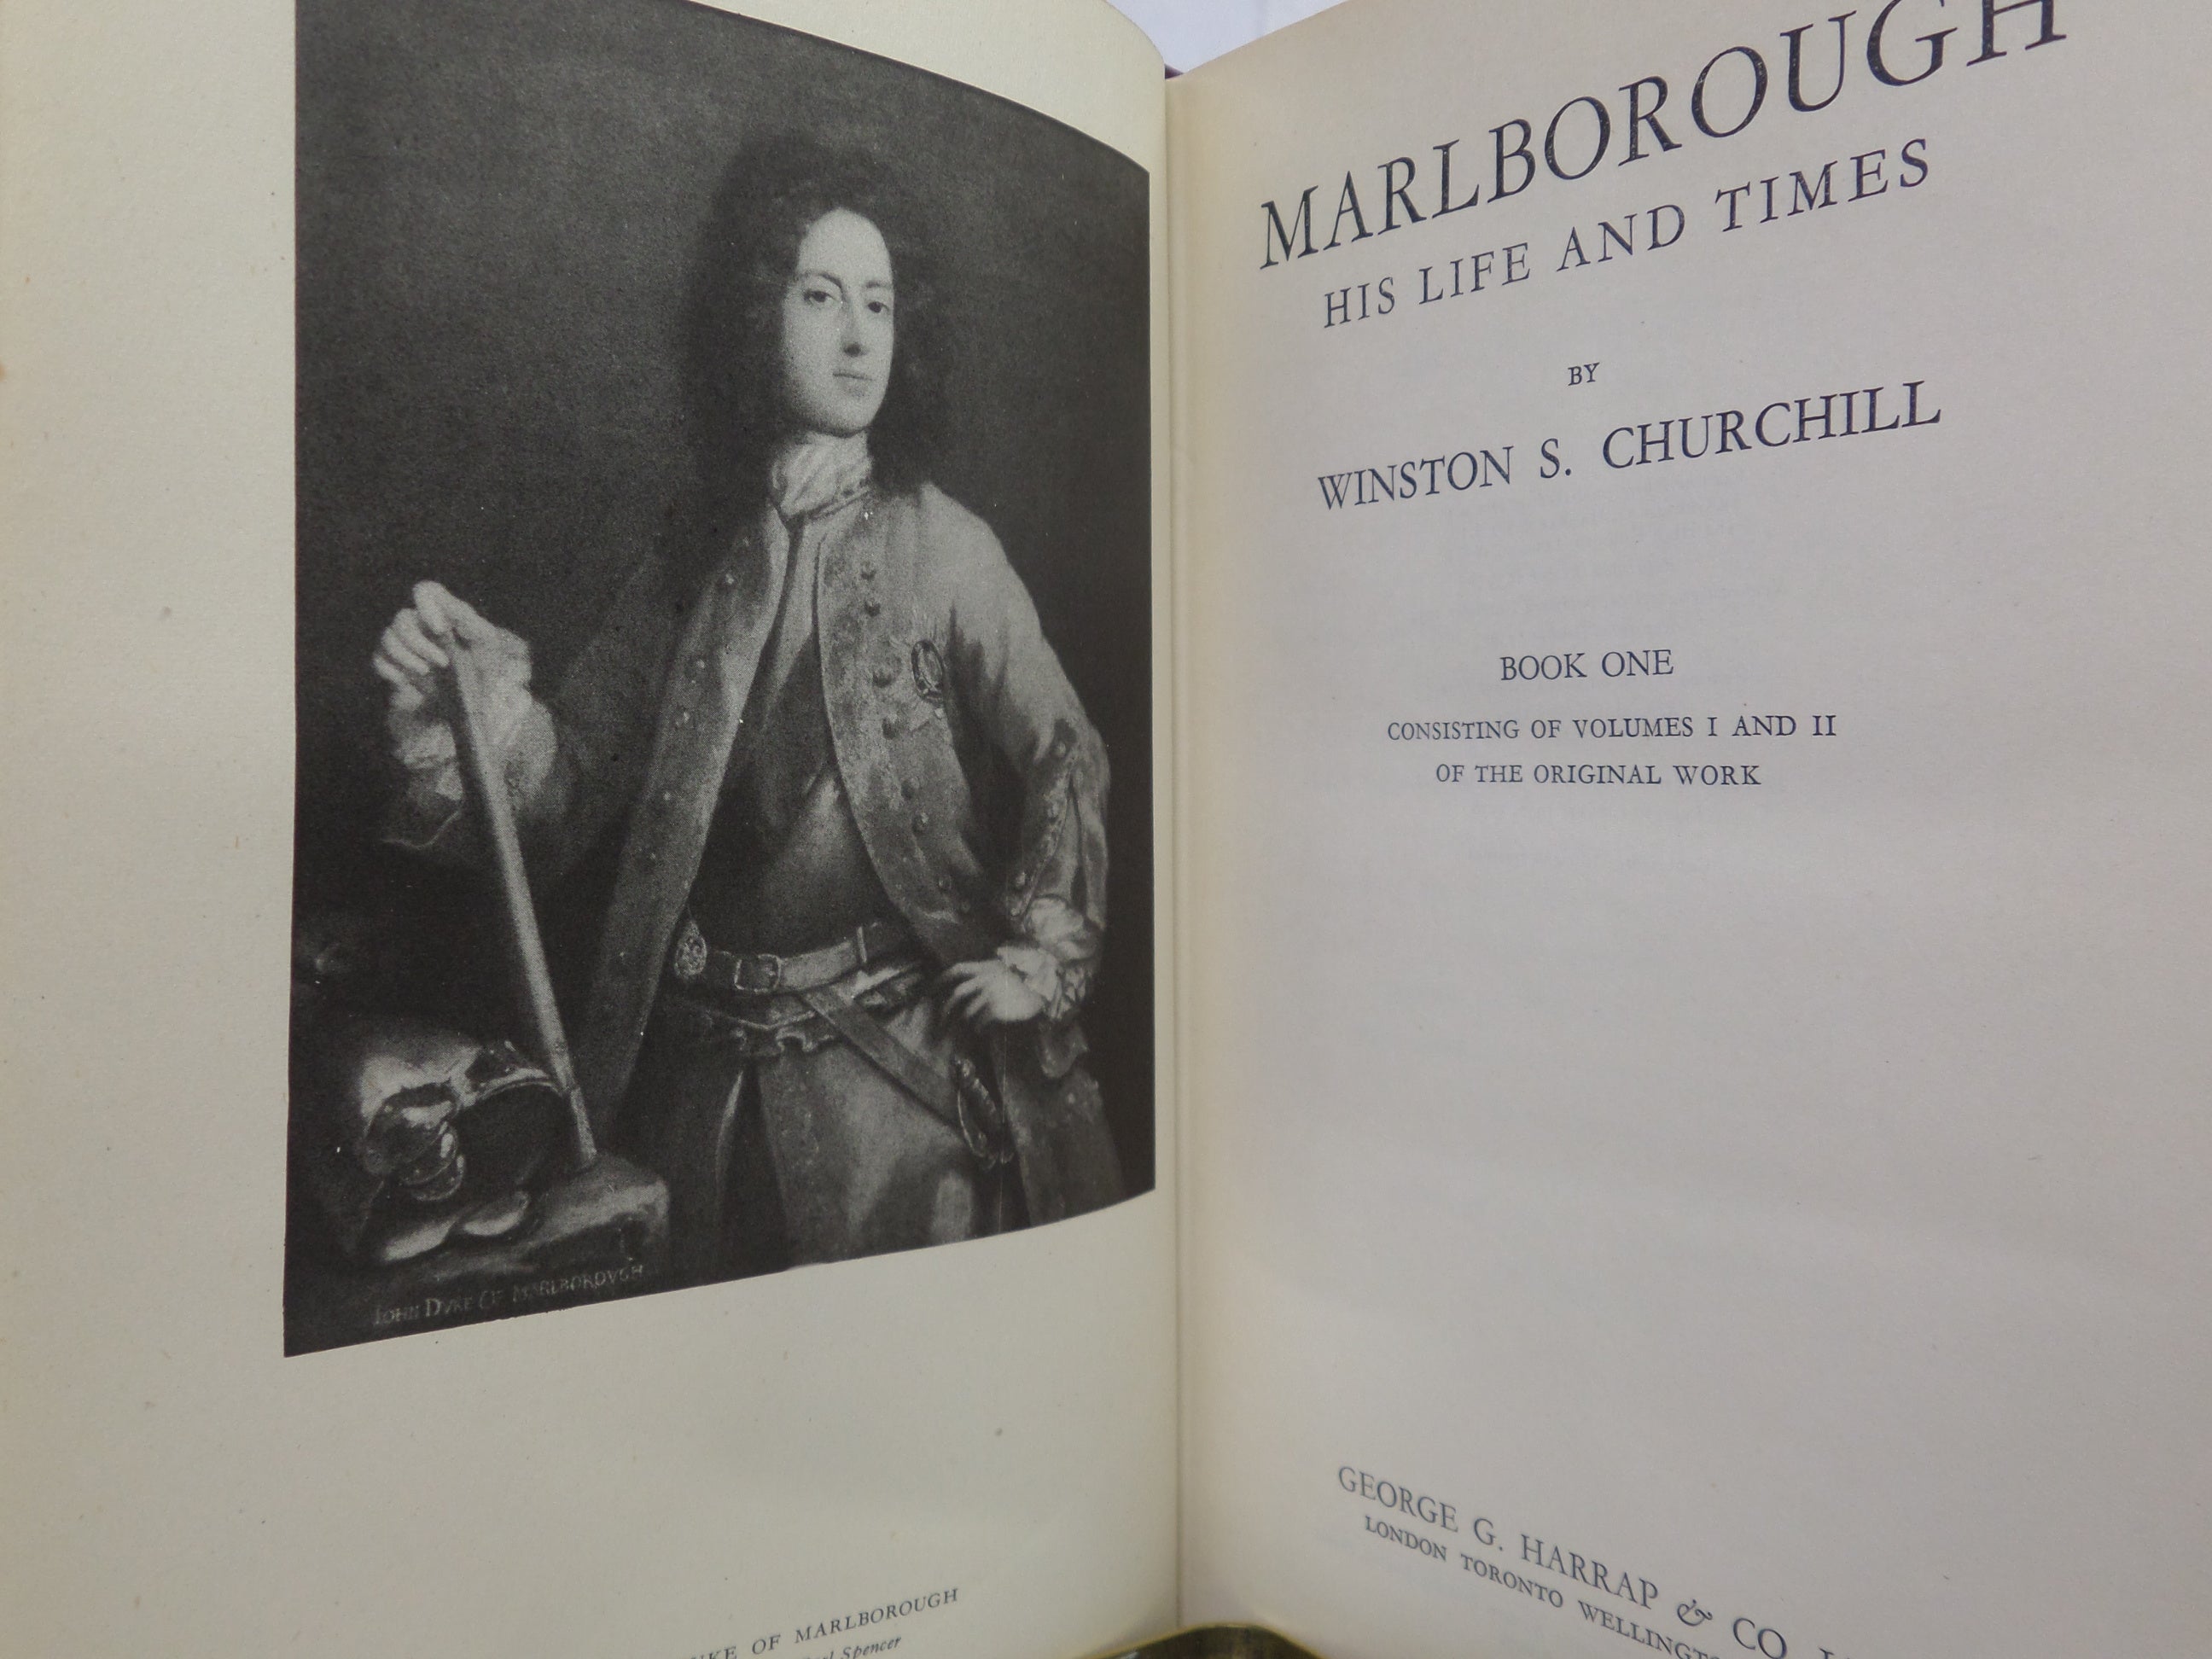 MARLBOROUGH HIS LIFE AND TIMES BY WINSTON CHURCHILL 1958 IN TWO VOLUMES